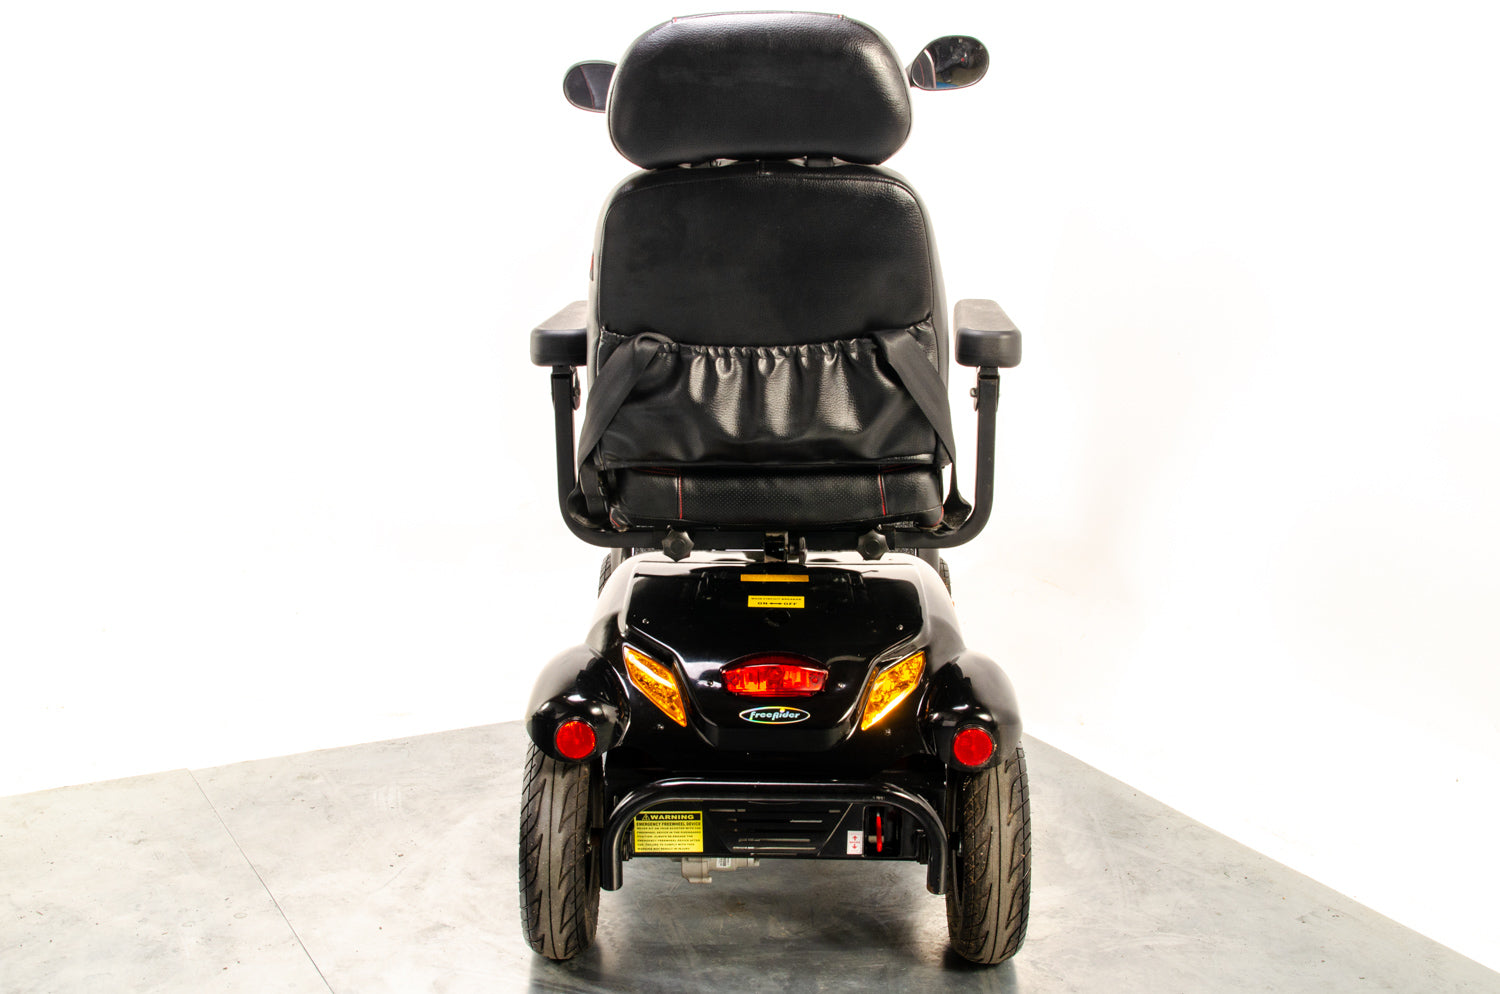 Freerider Landranger XL8 8mph Used Mobility Scooter All-Terrain Off-Road Road Legal Large 03512